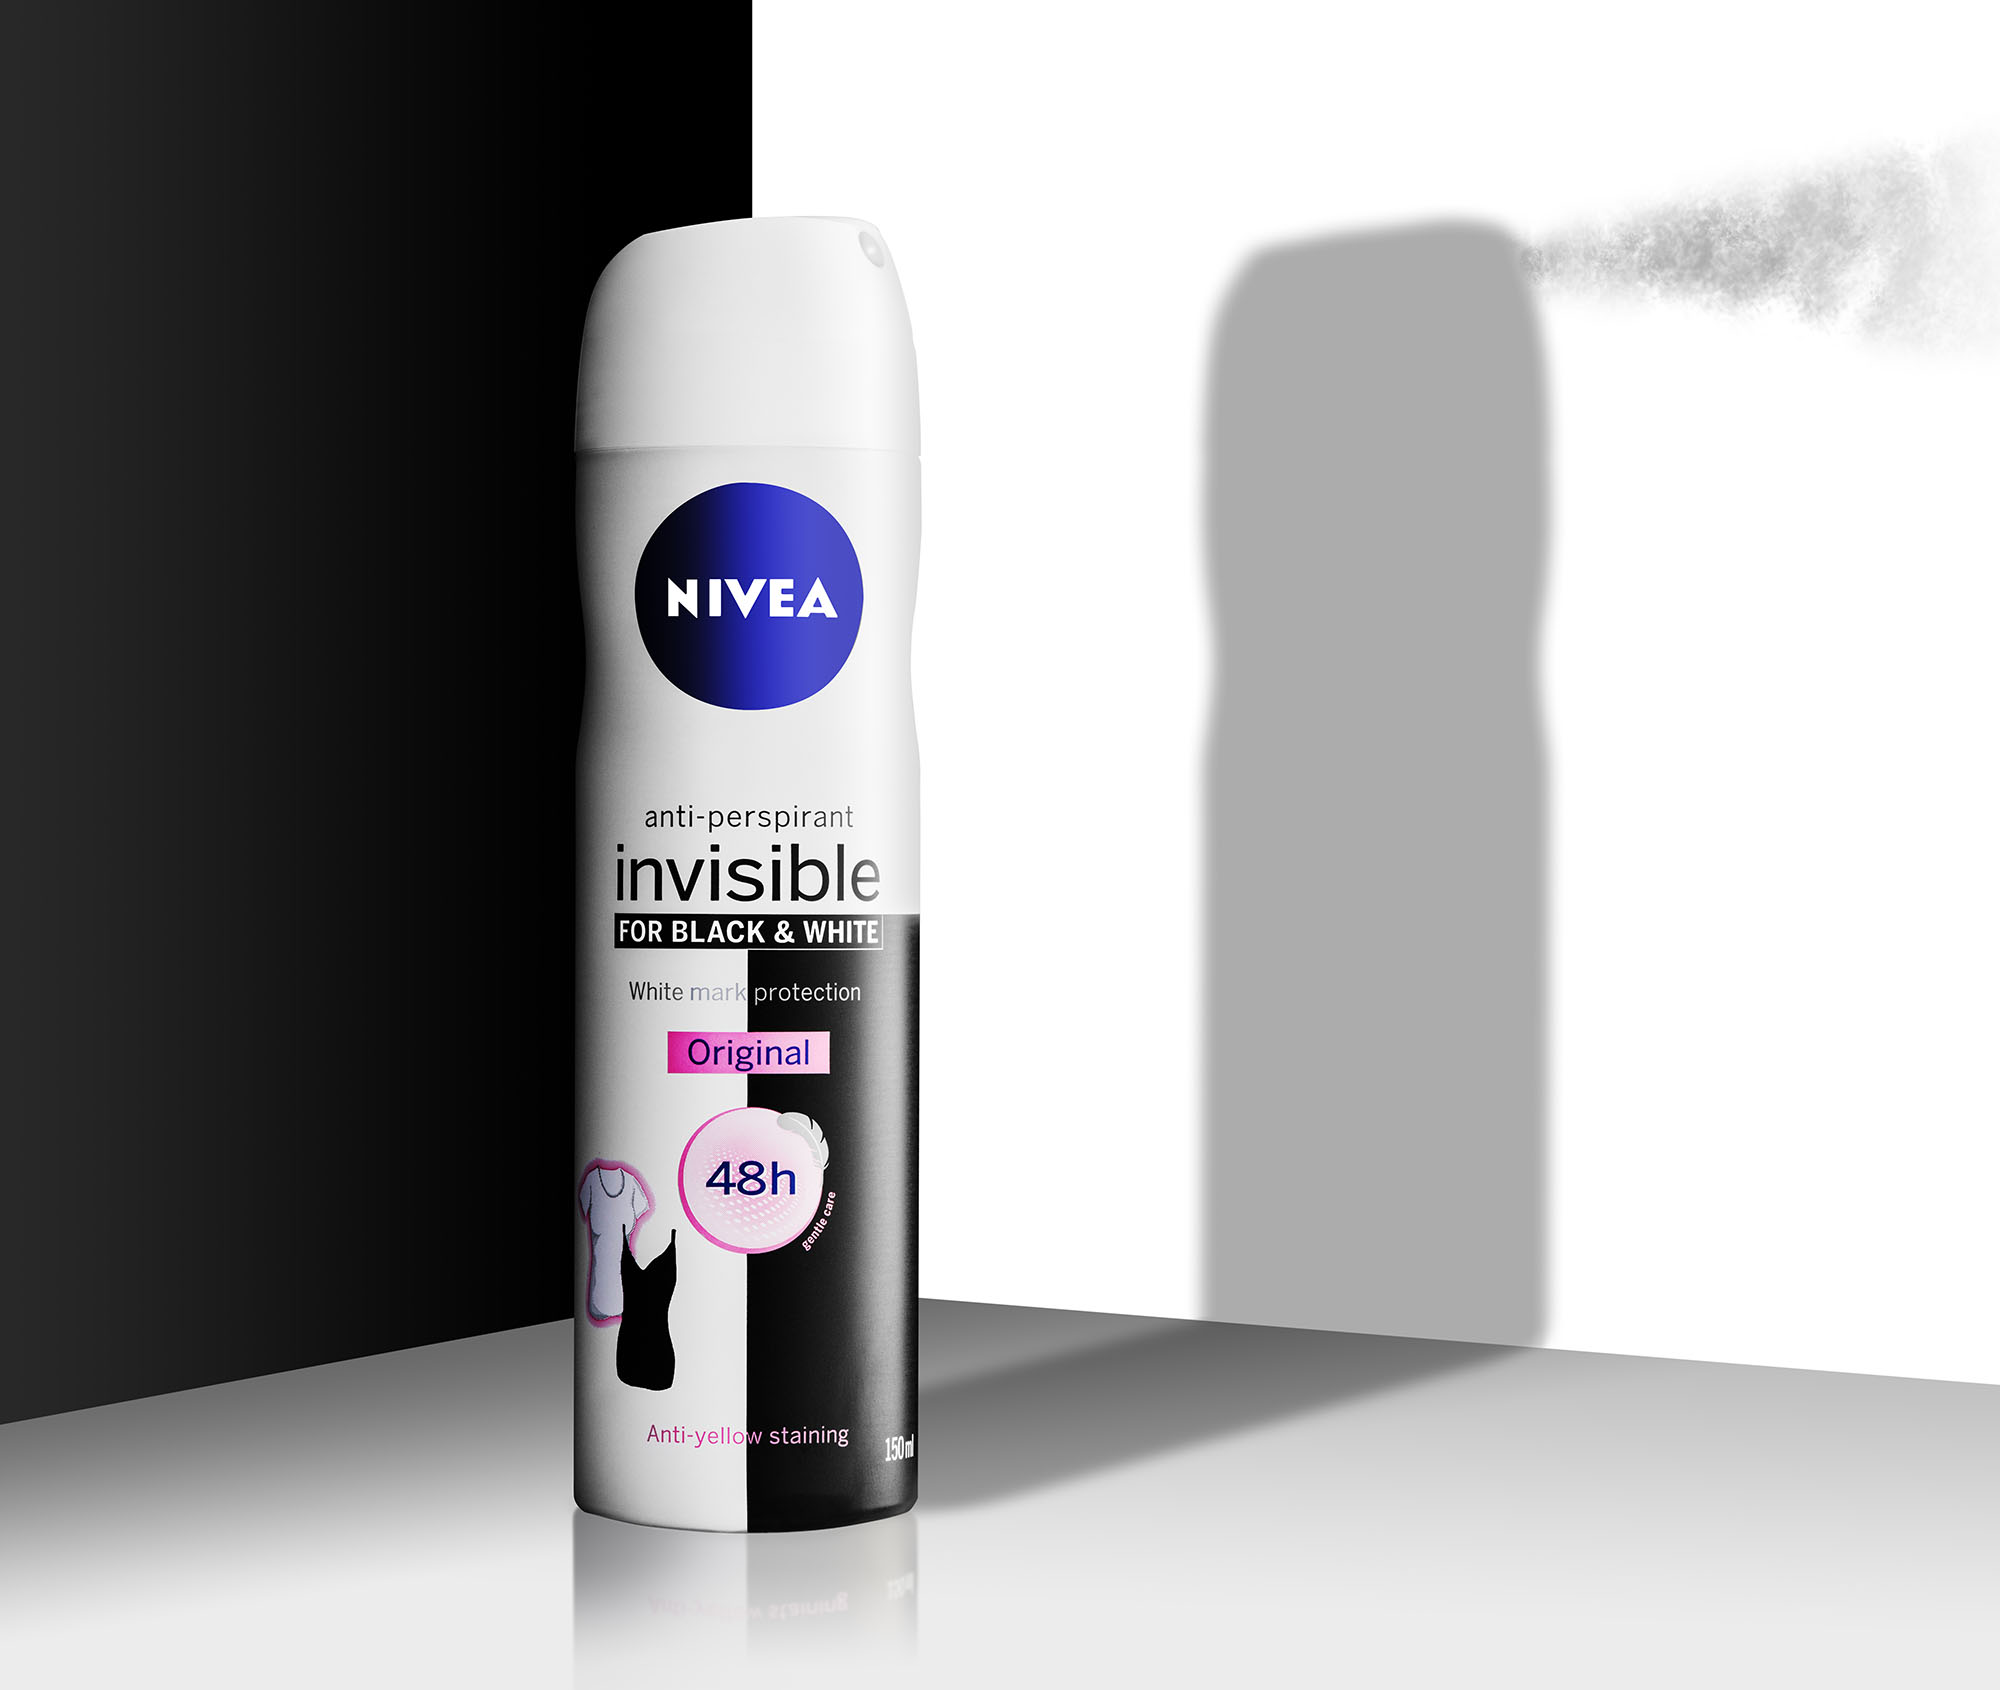 Ian Knaggs Commercial Product Photographer - Nivea Invisible